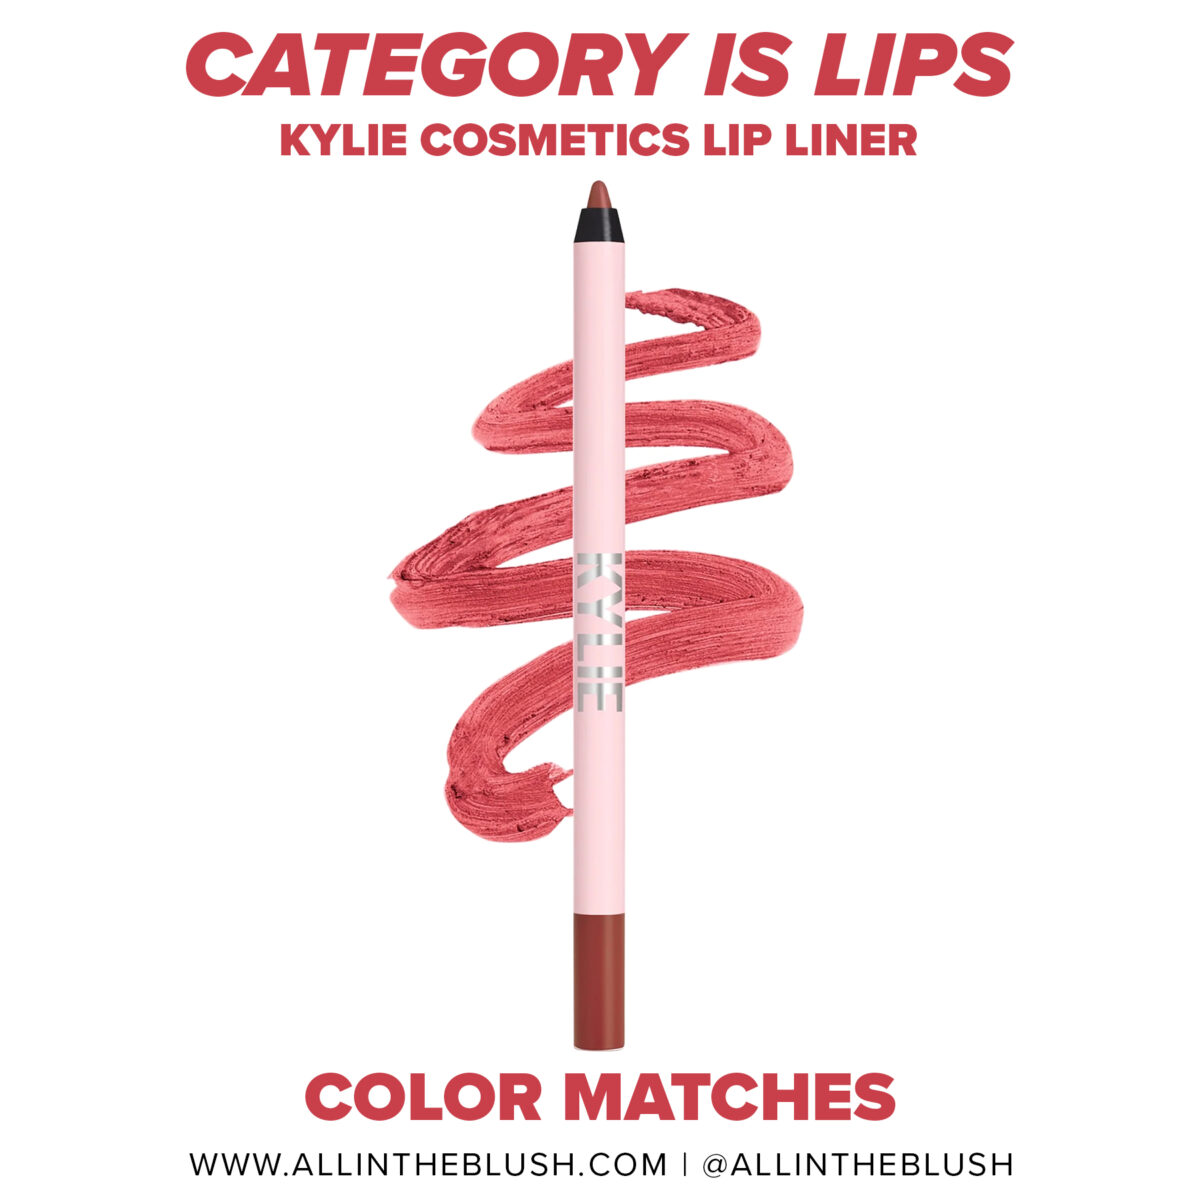 Kylie Cosmetics Category Is Lips Lip Liner Dupes